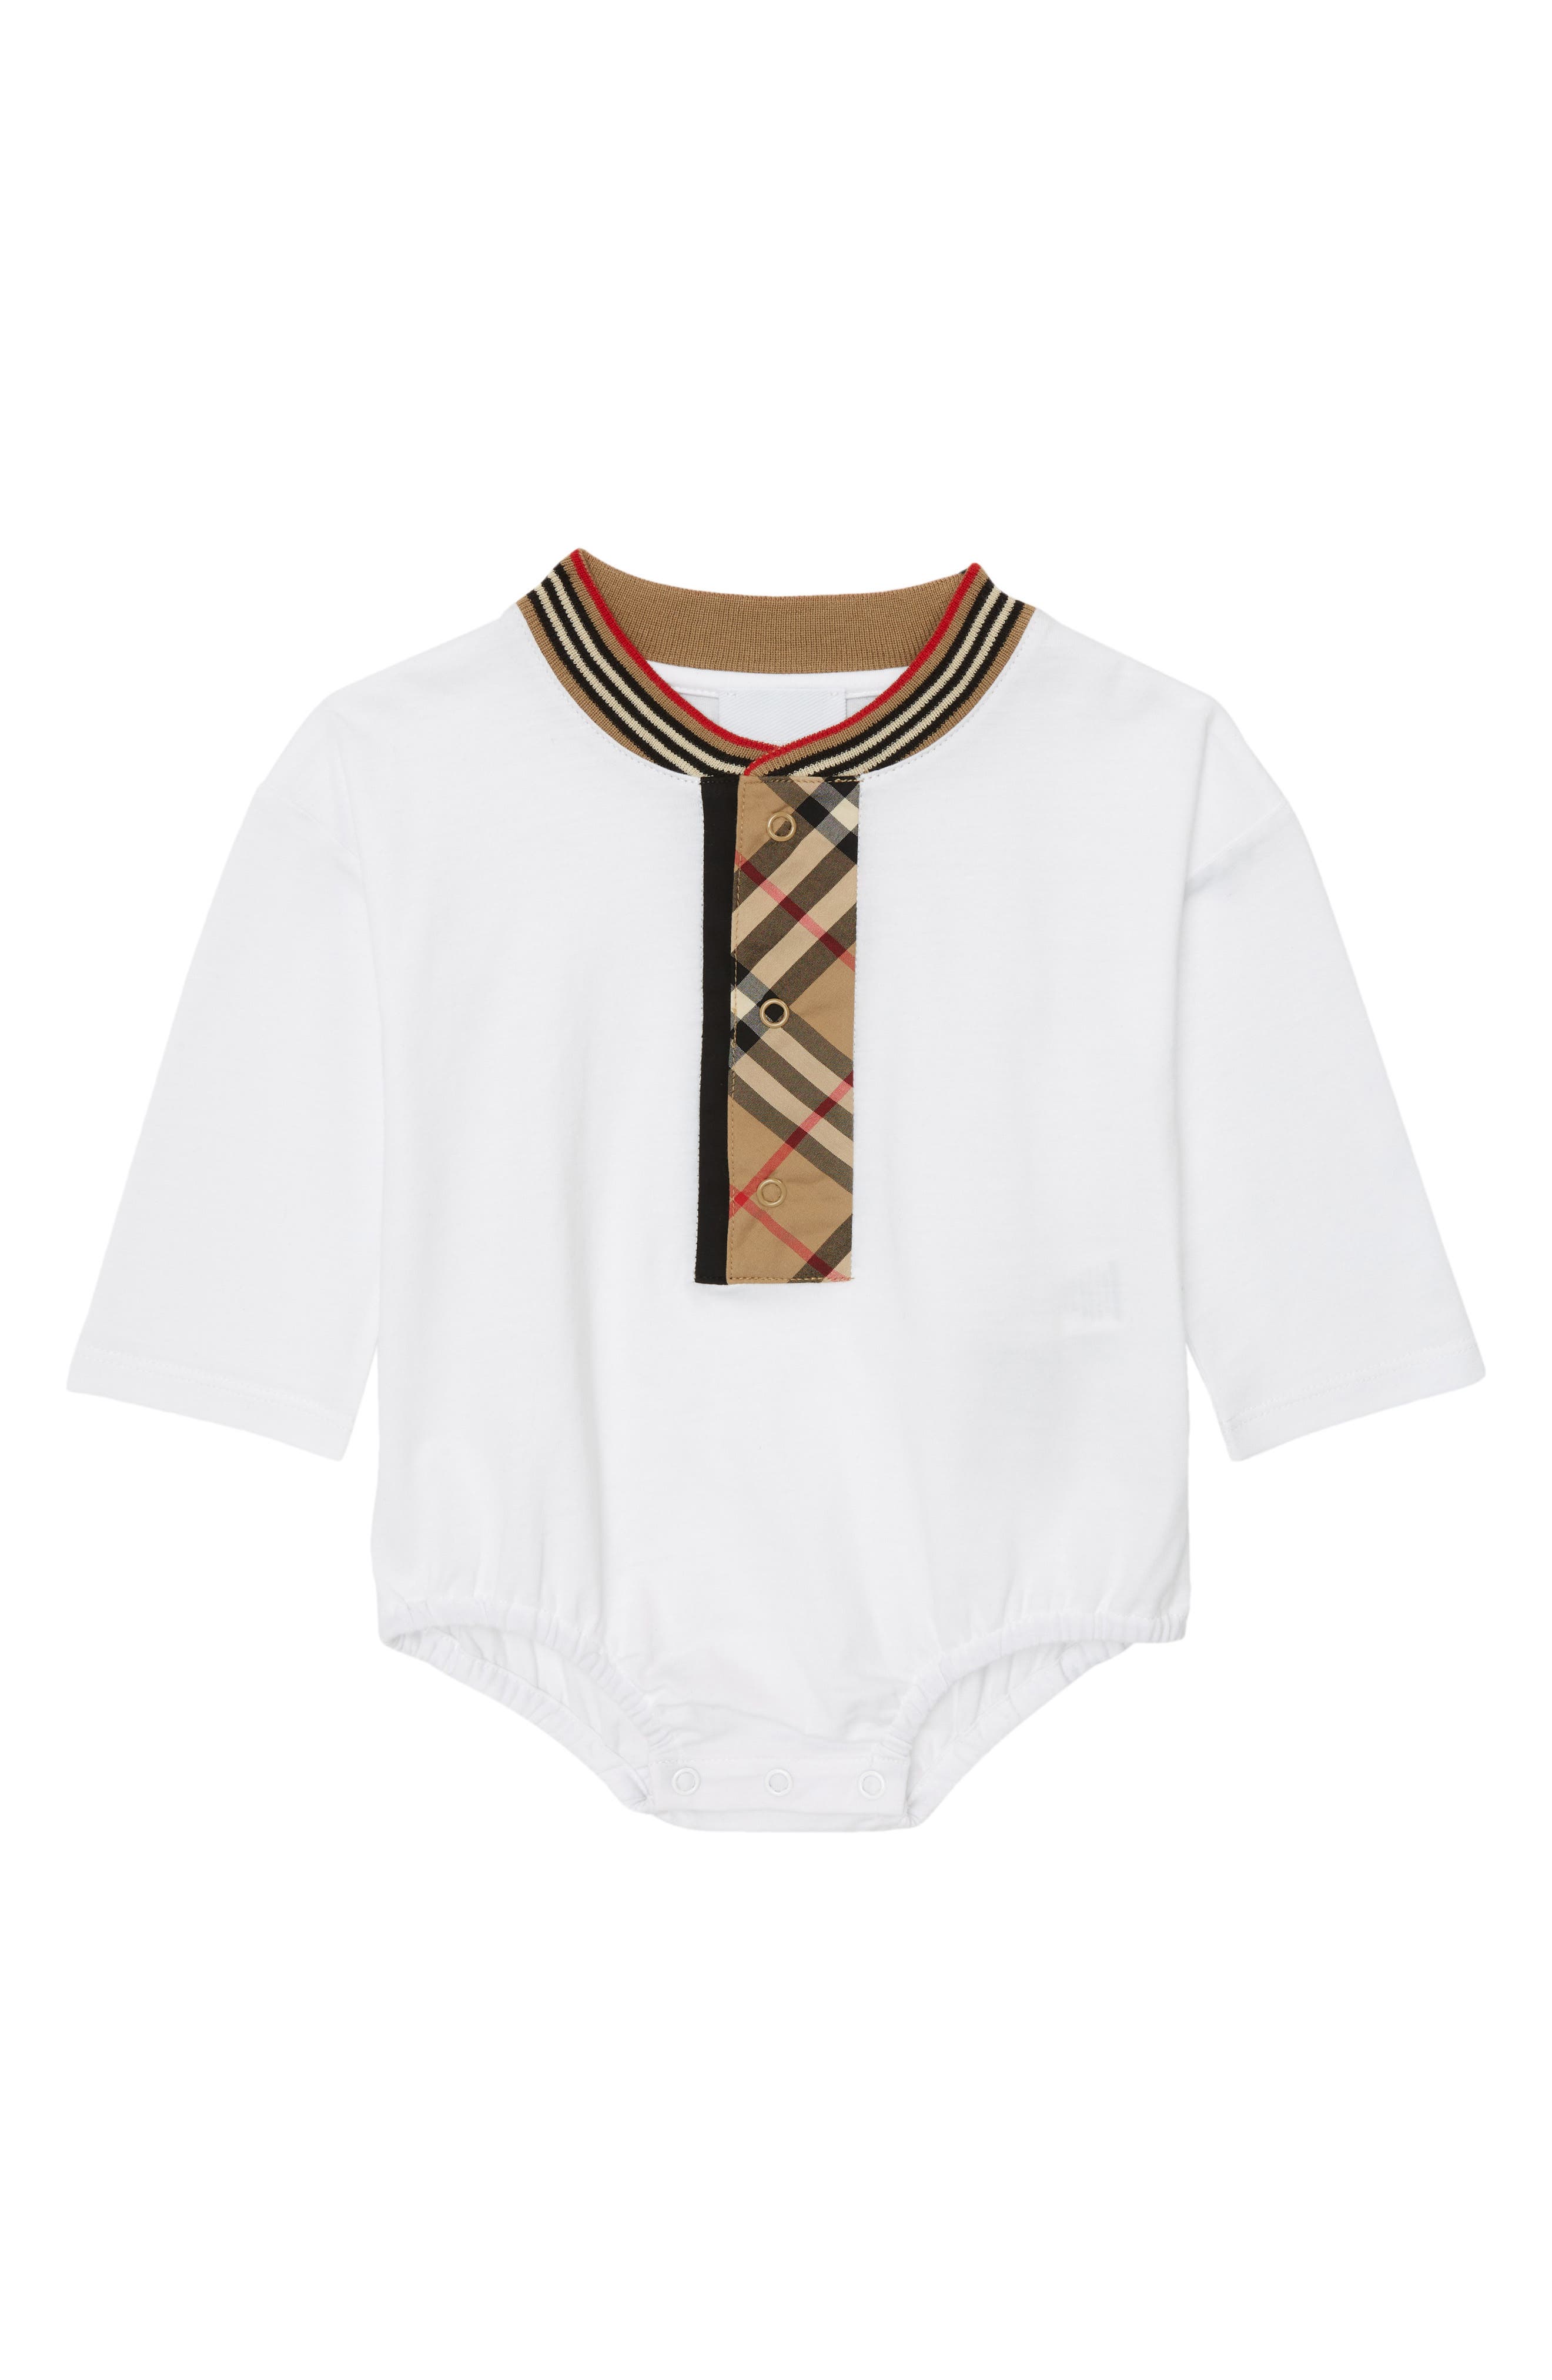 Burberry Knox Check Shirt in White at Nordstrom, Size 1M Us